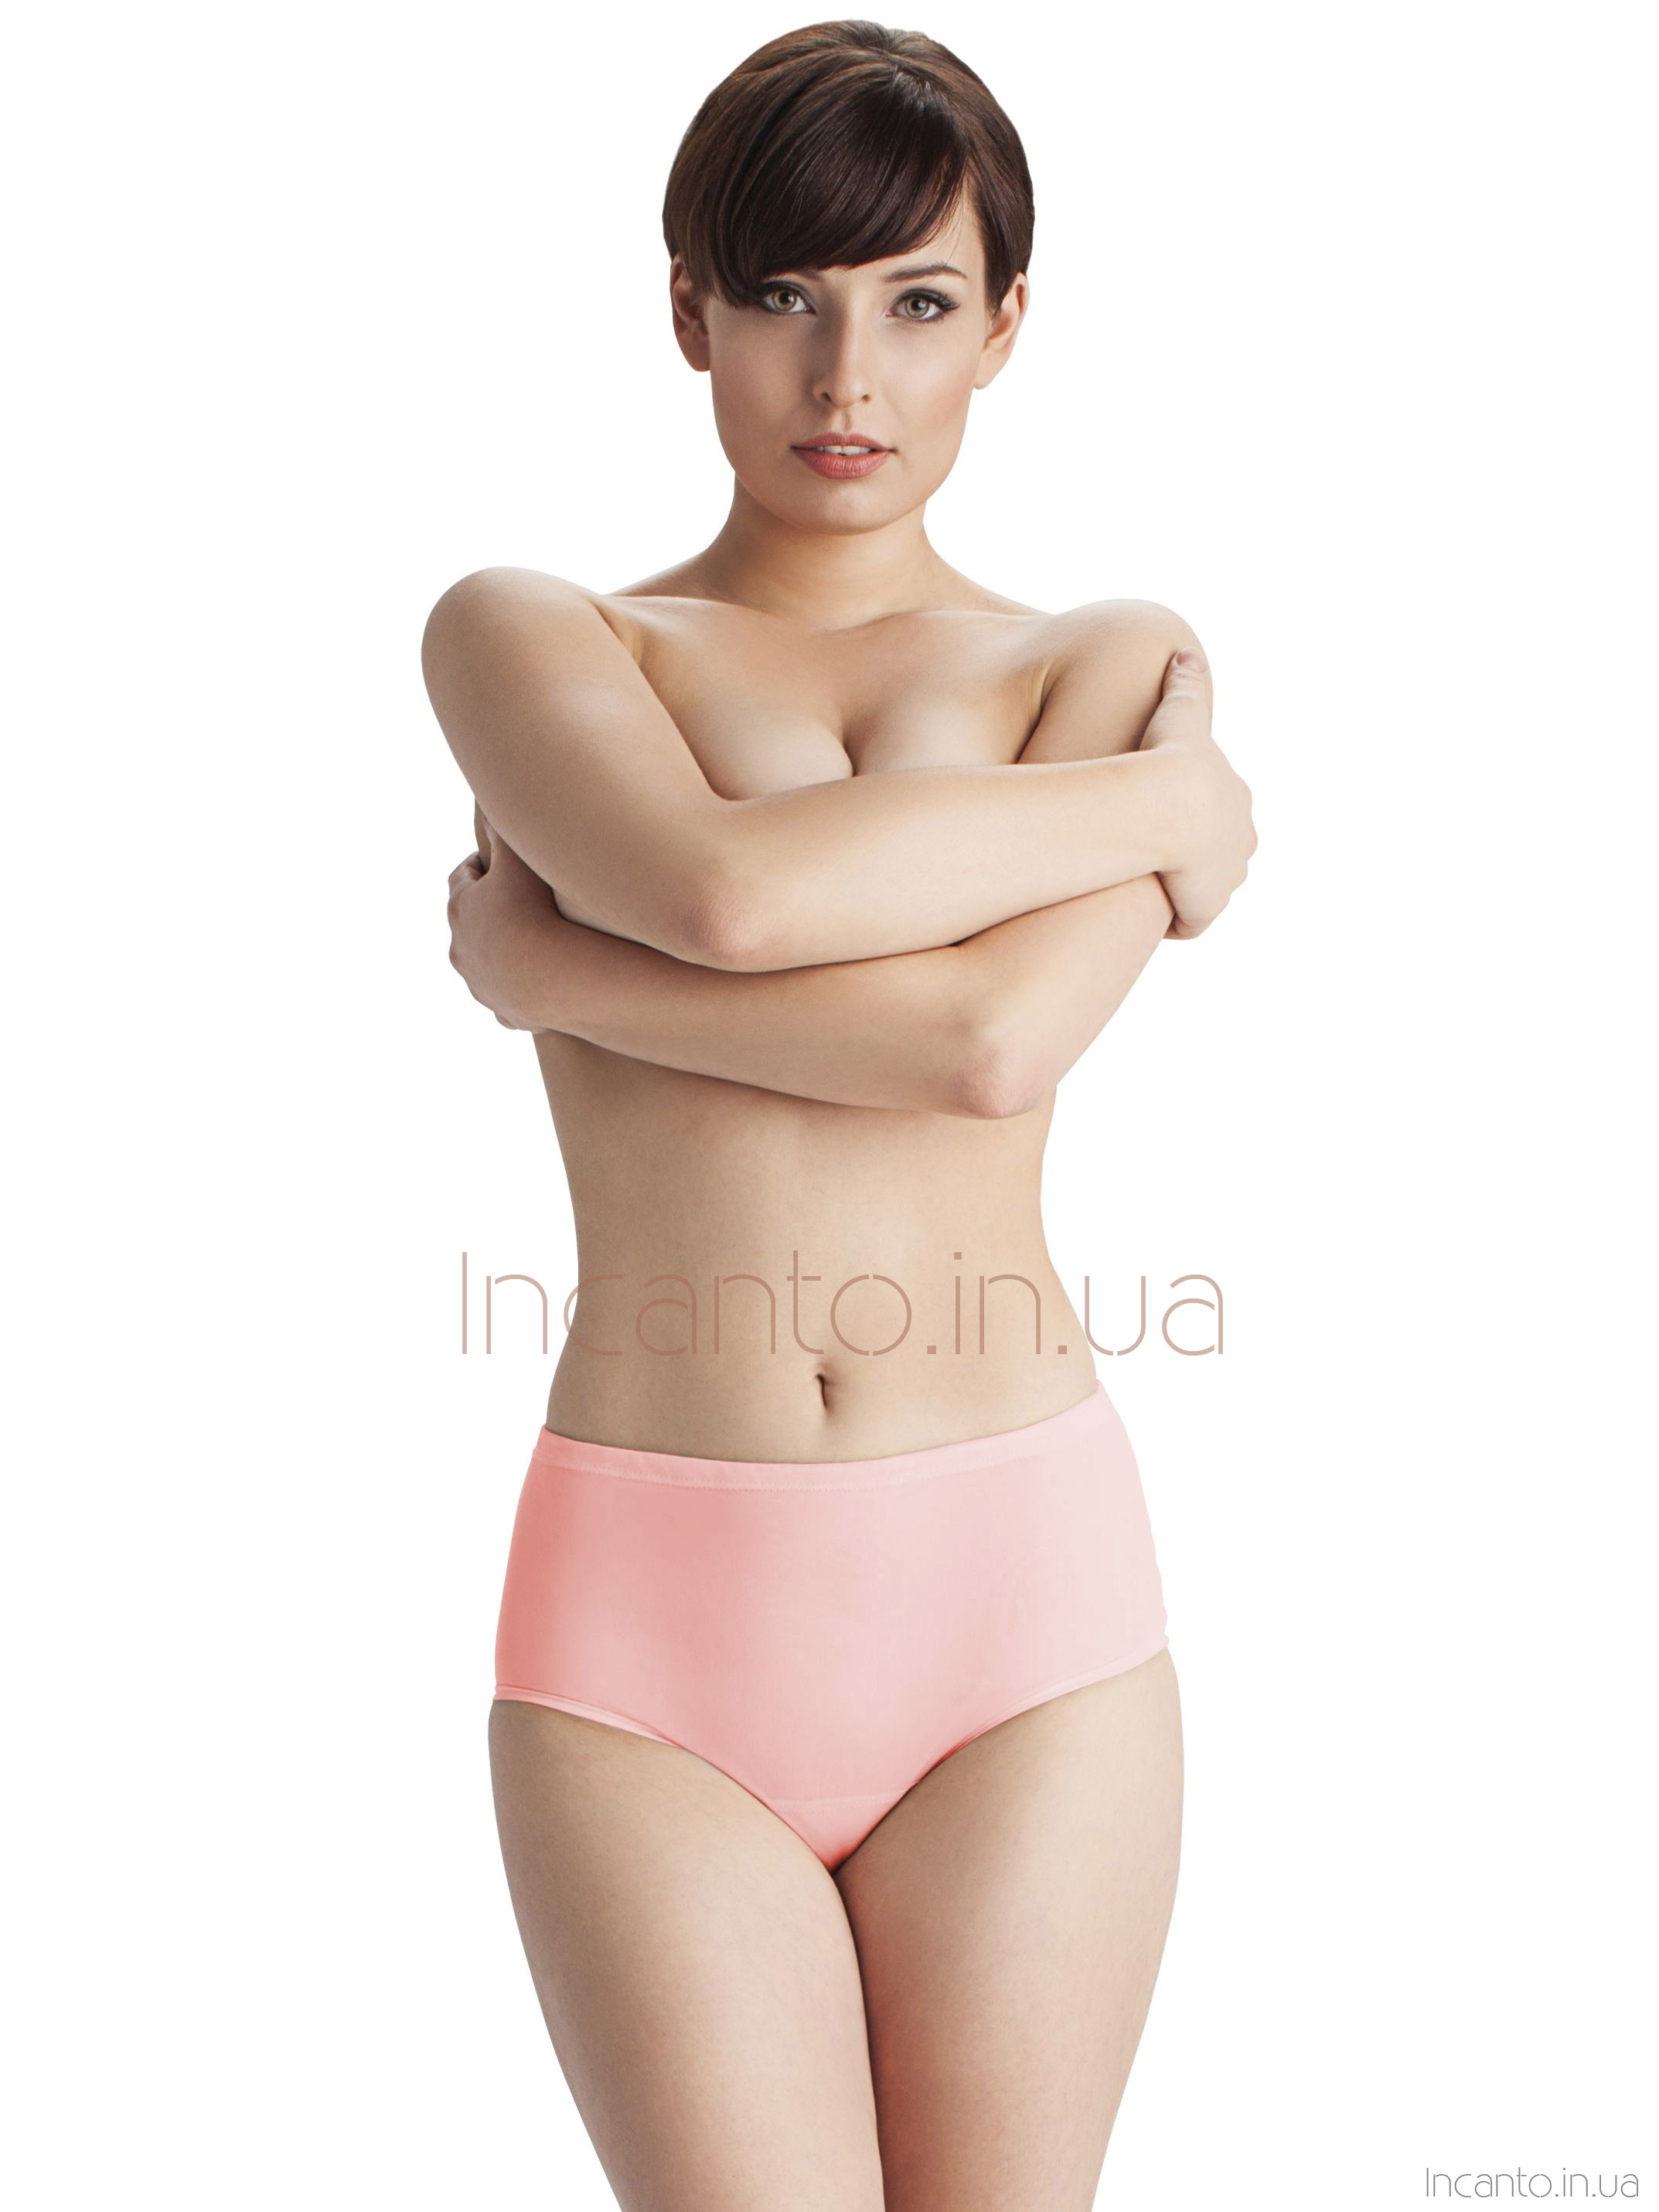 Mewa 84134 women's slip-on panties made of soft viscose with a high waist #11